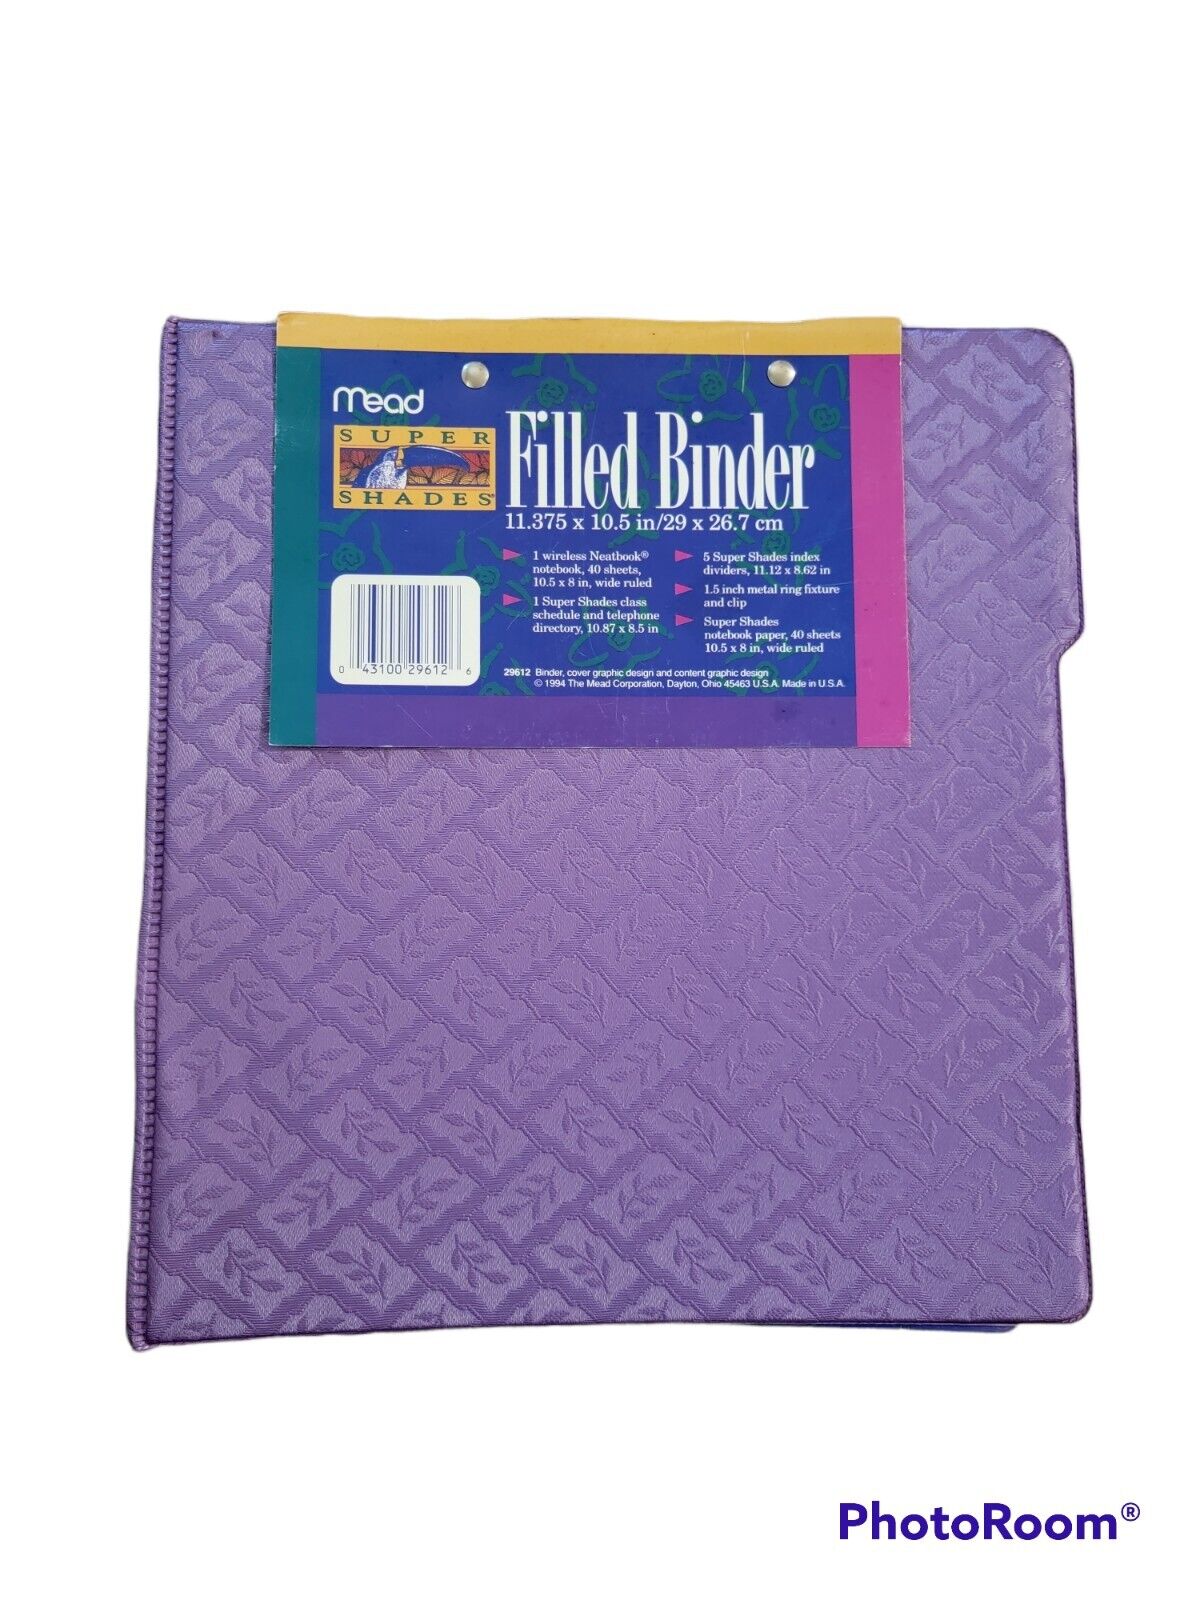 RARE Vintage Mead Super Shades Filled Binder Amazing Condition NEW 1994 Purple